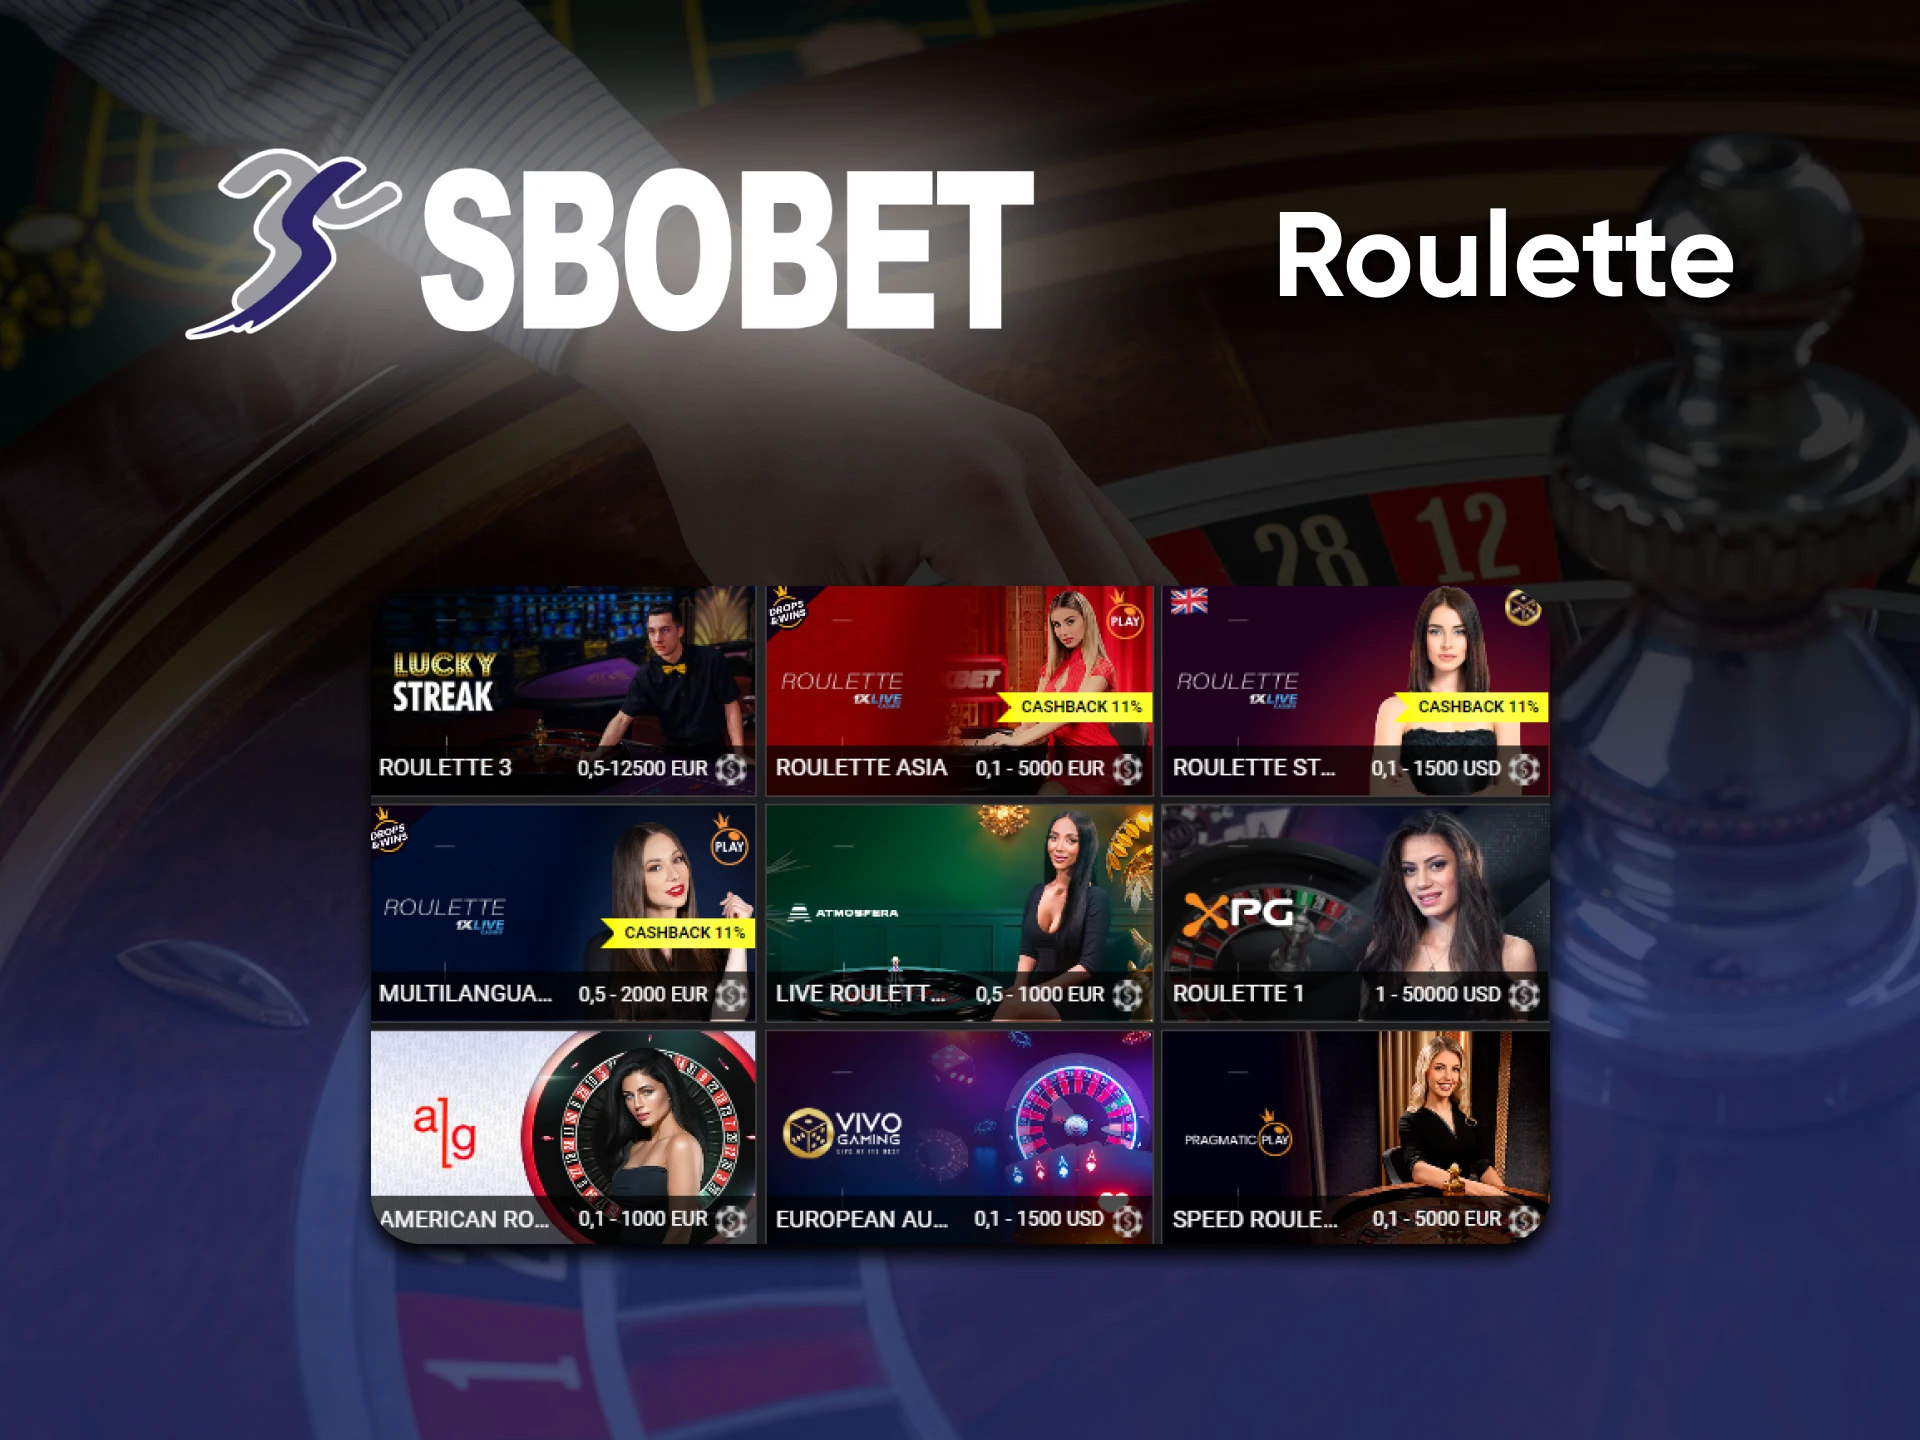 On the Sbobet site, you can play games like Roulette.